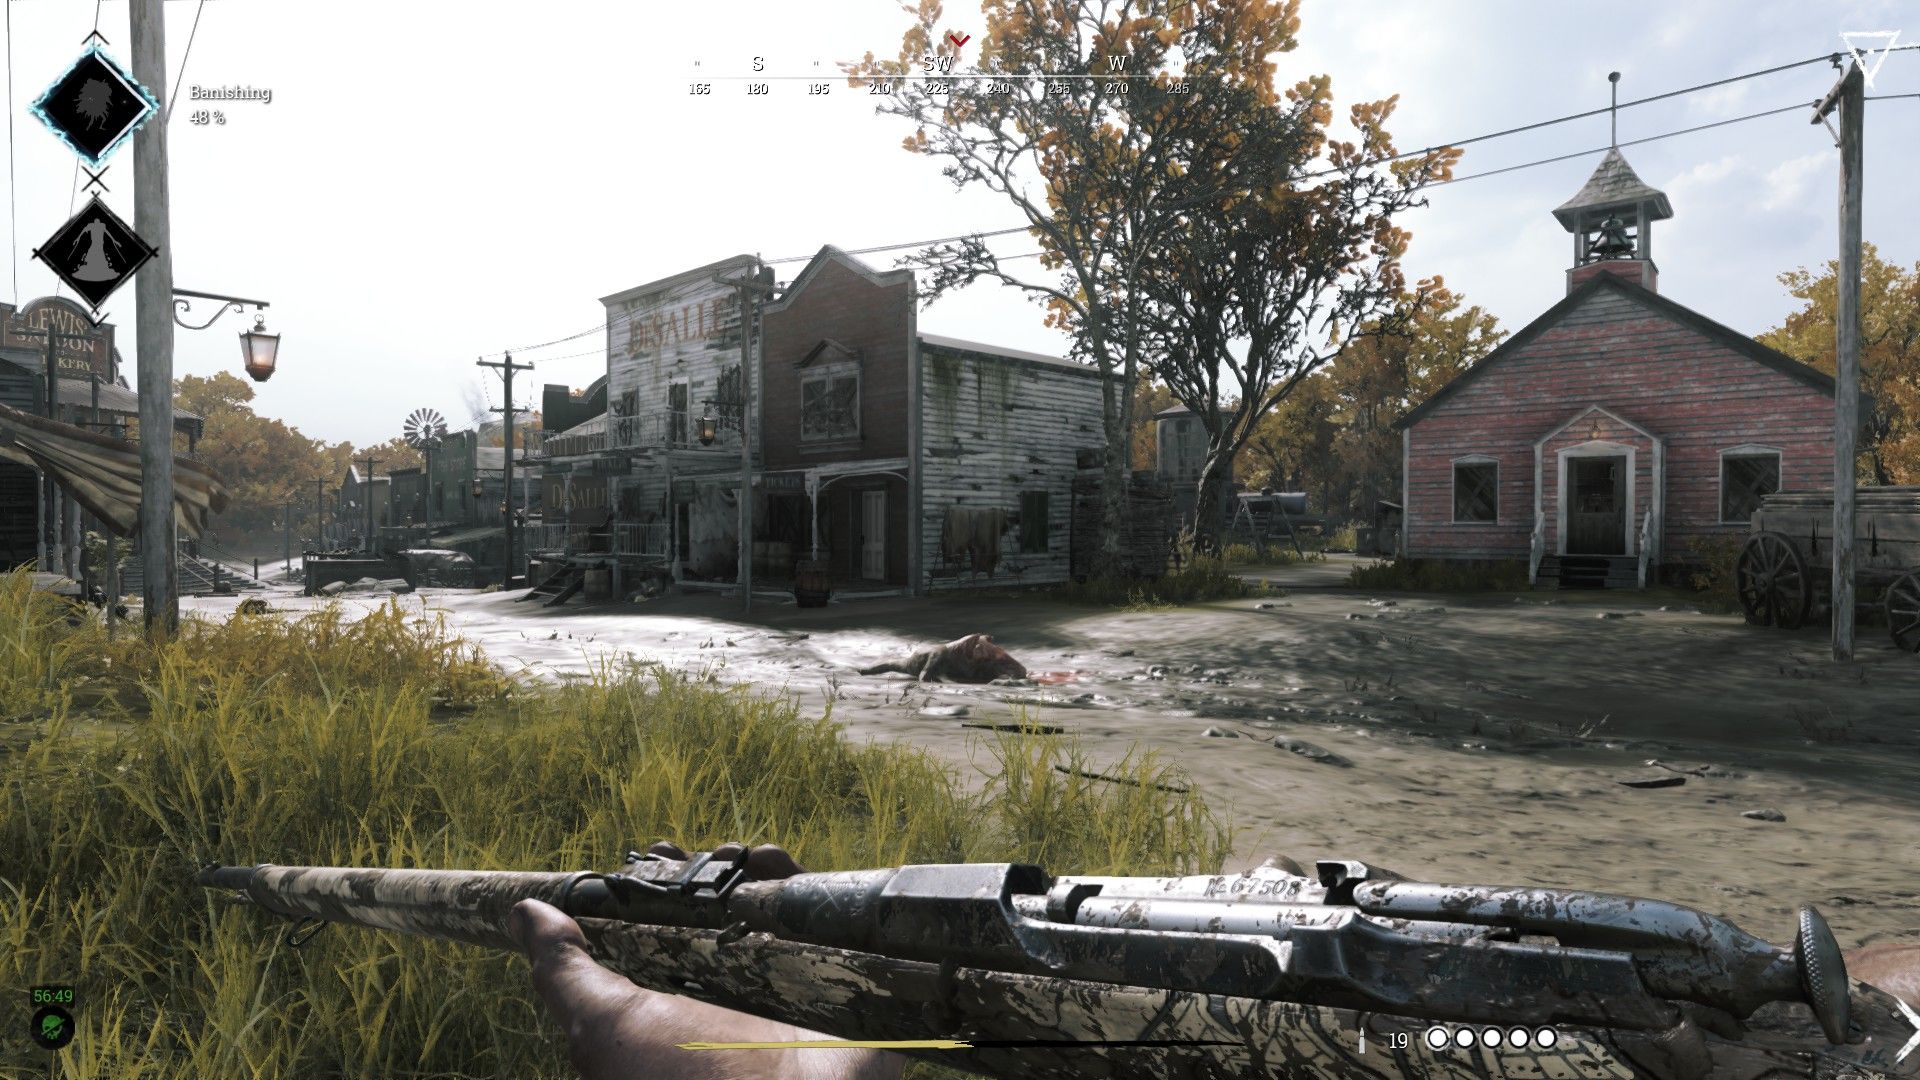 The player holds a rifle in Hunt Showdown's new Desalle map